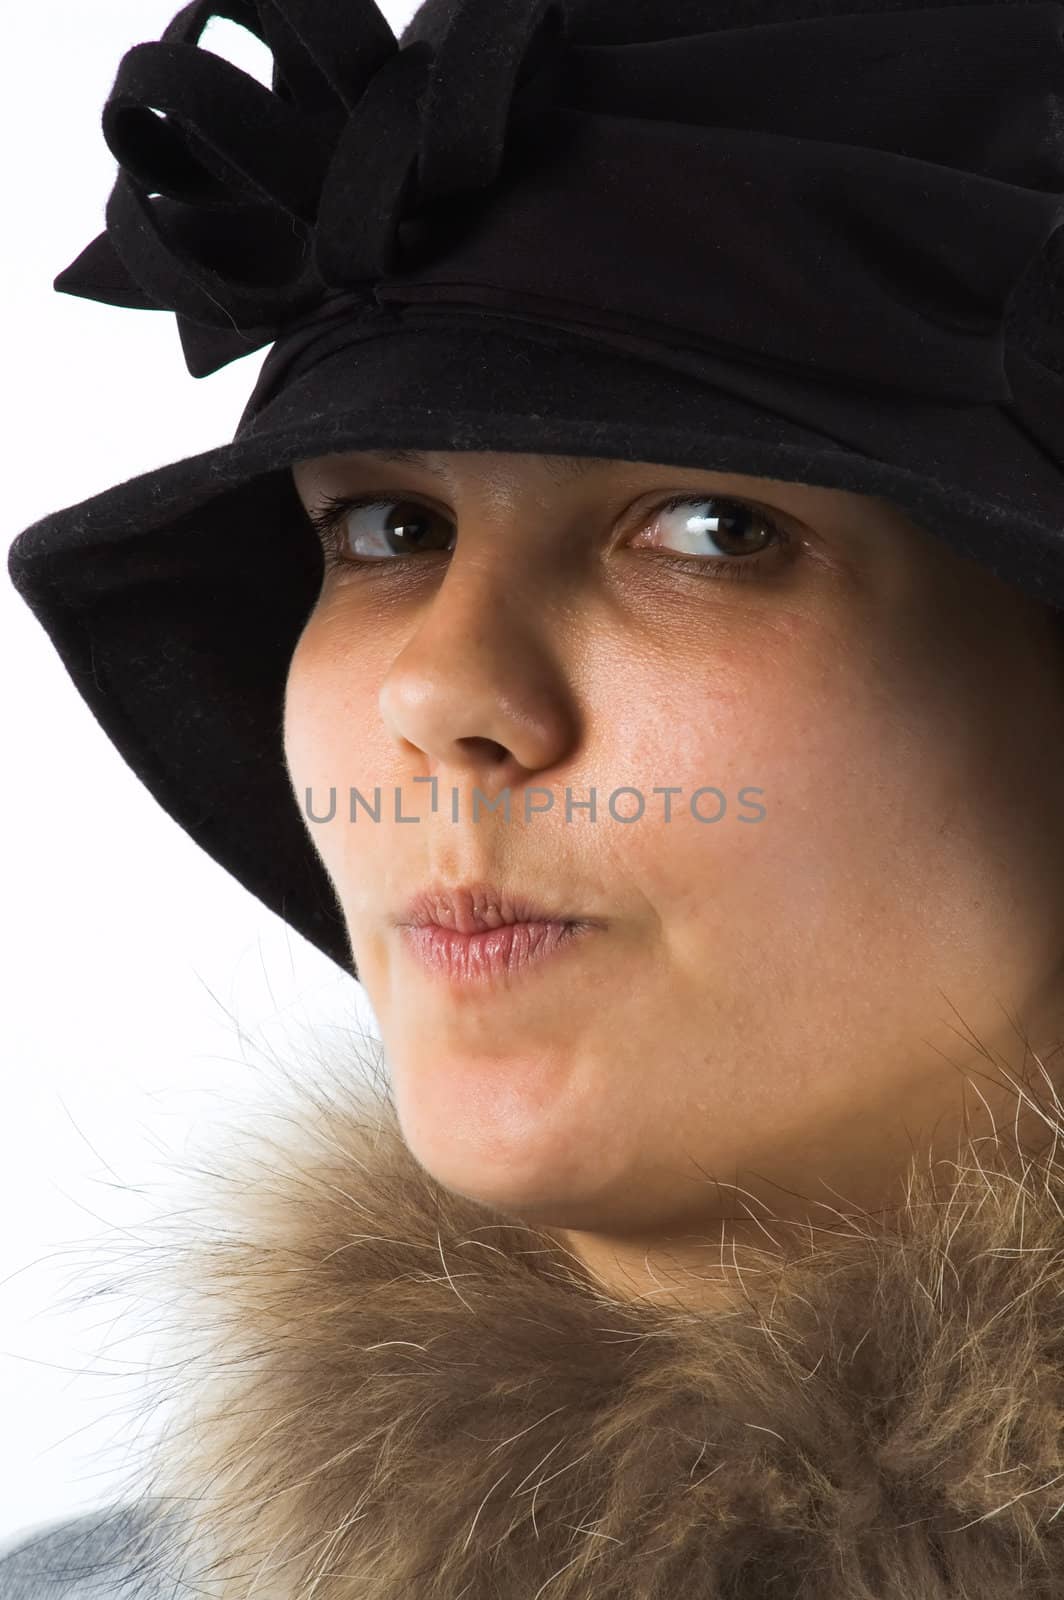 The girl in a hat has drawn in lips and looks at the photographer